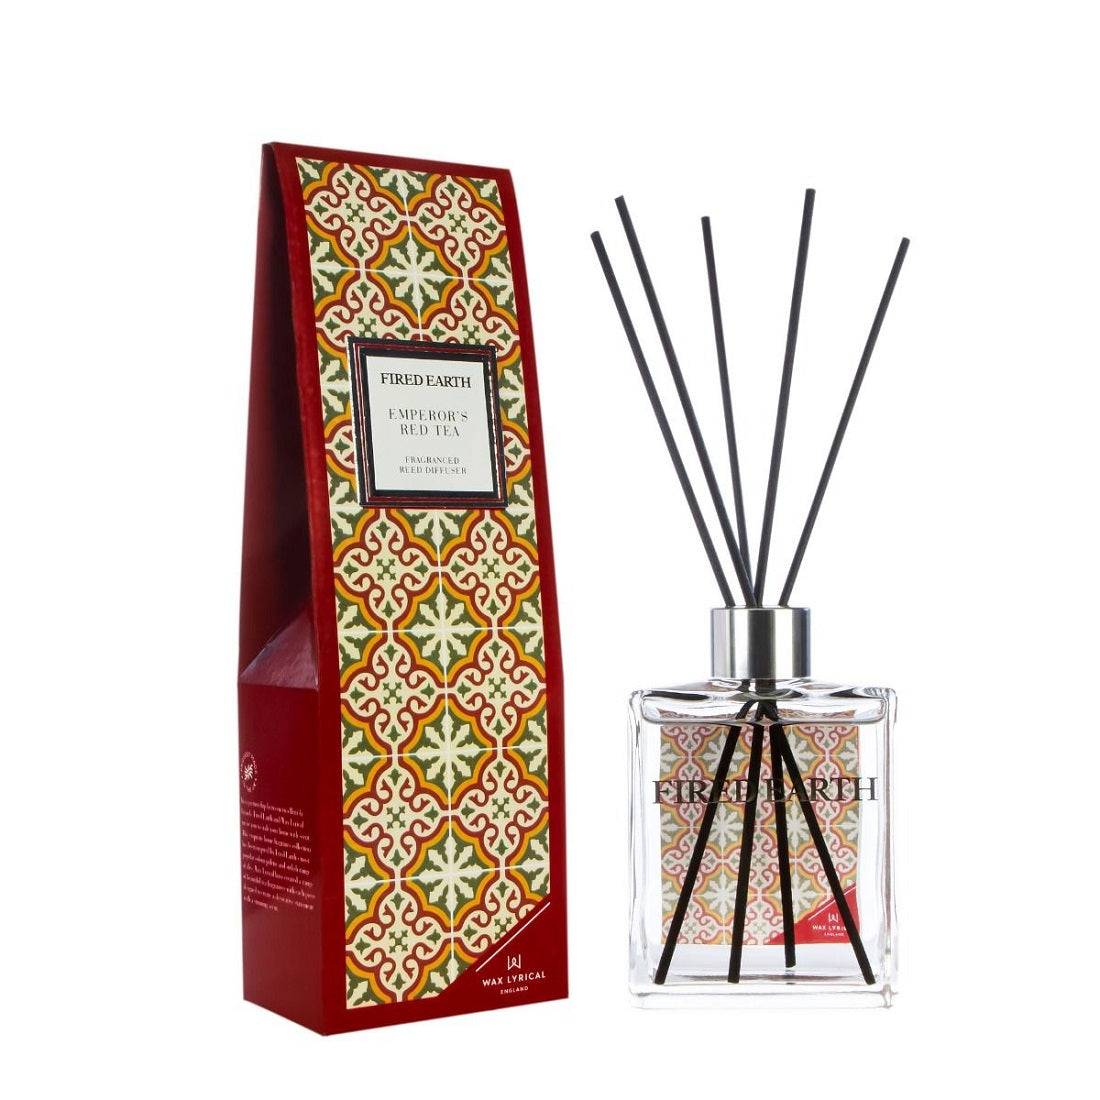 Fired Earth  Reed Diffuser 180ml Emperors Red Tea